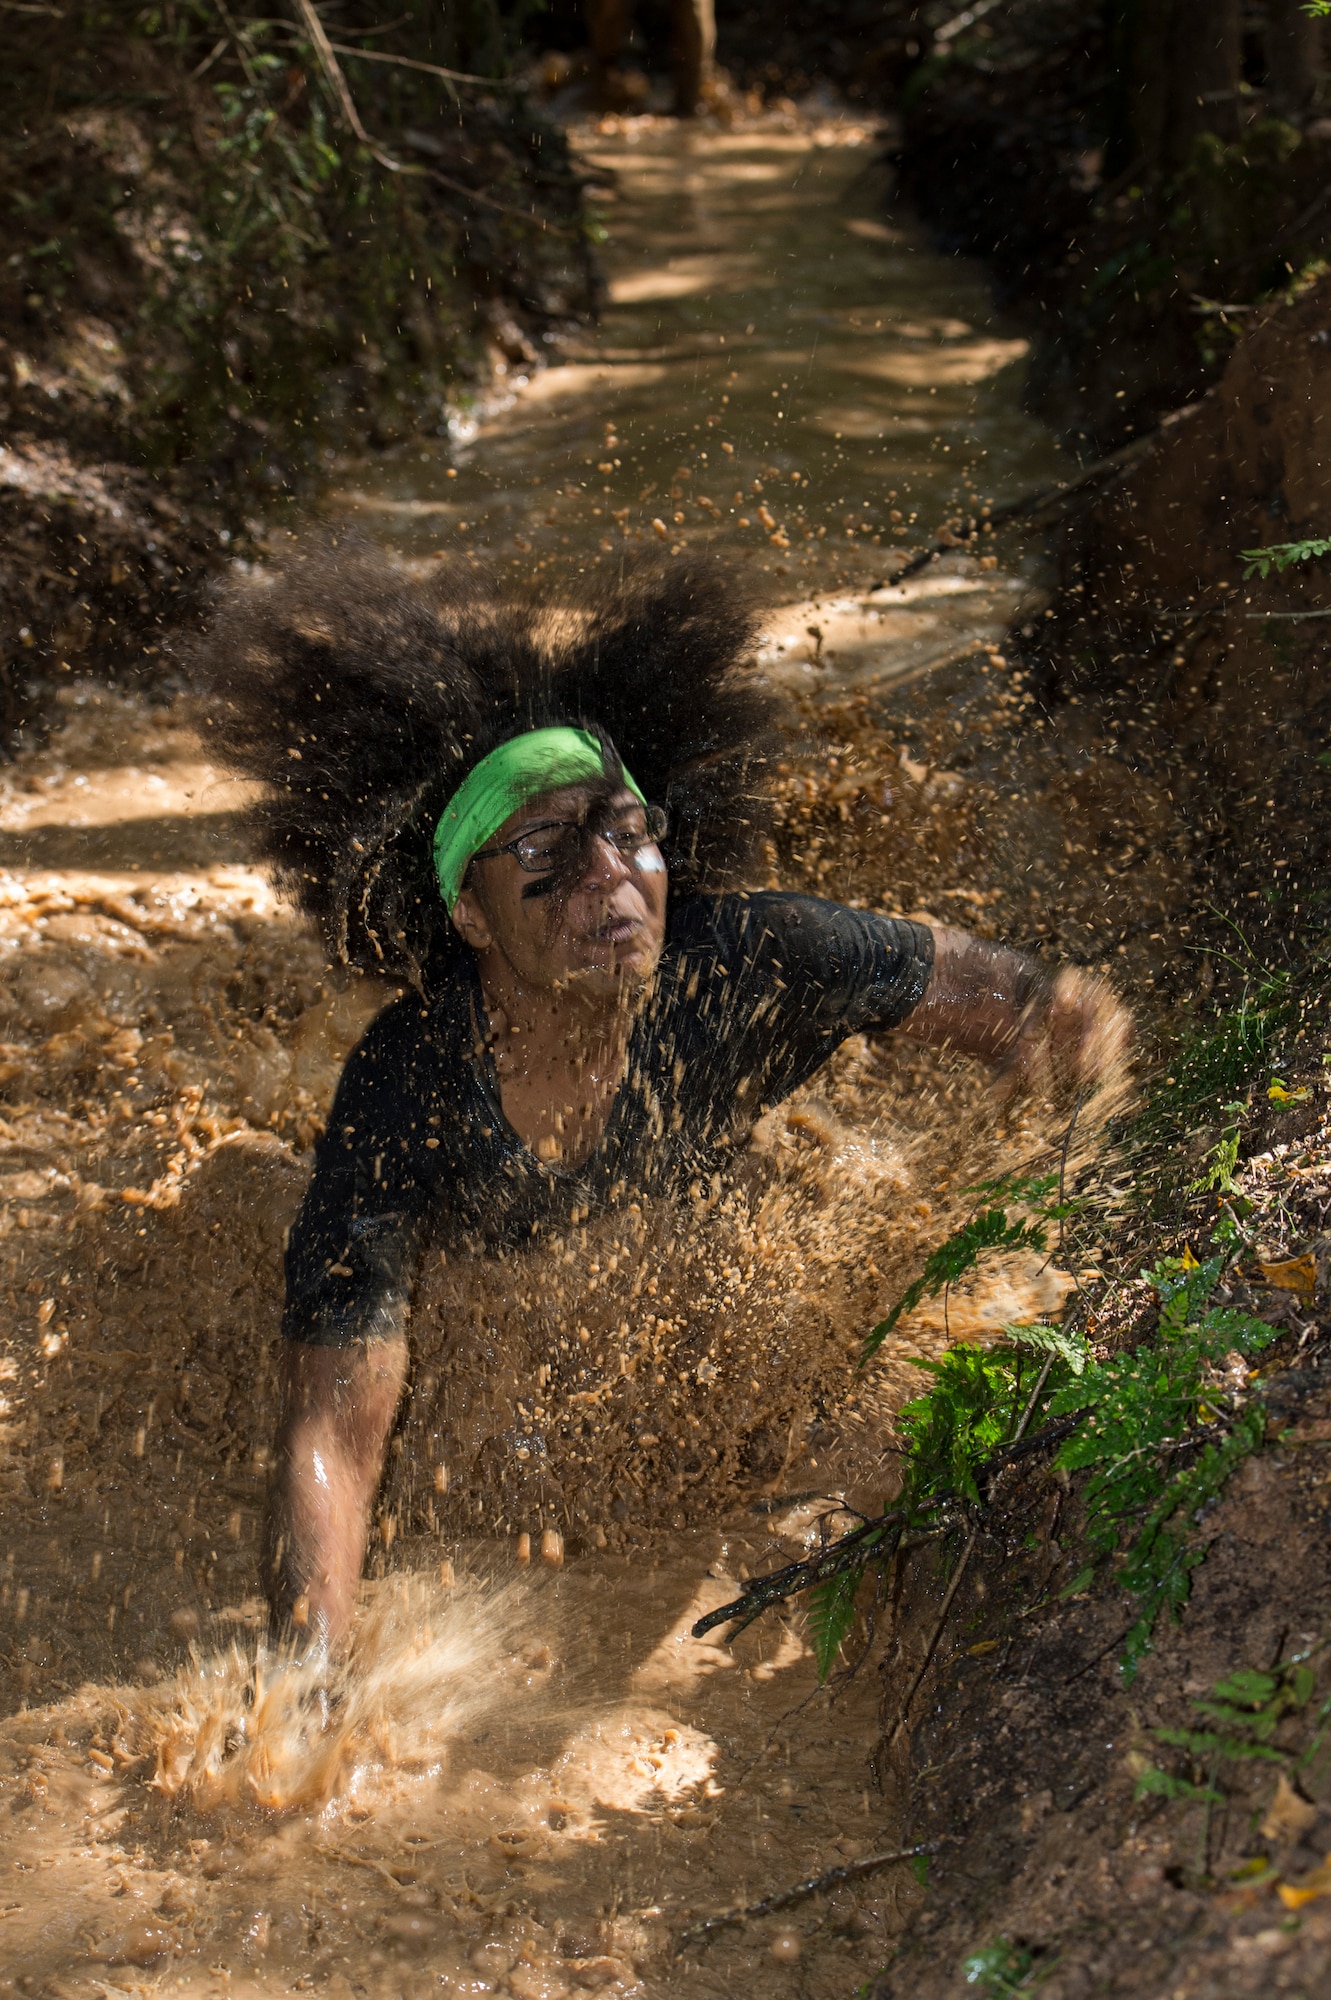 A mud run participant tumbles into the mud during the second annual Tier II 5K Mud Run Aug. 20, 2014, at Spangdahlem Air Base, Germany. More than 100 people participated in the mud run. Private organizations from around the base worked together to build the obstacles for runners. (U.S. Air Force photo by Staff Sgt. Christopher Ruano/Released)